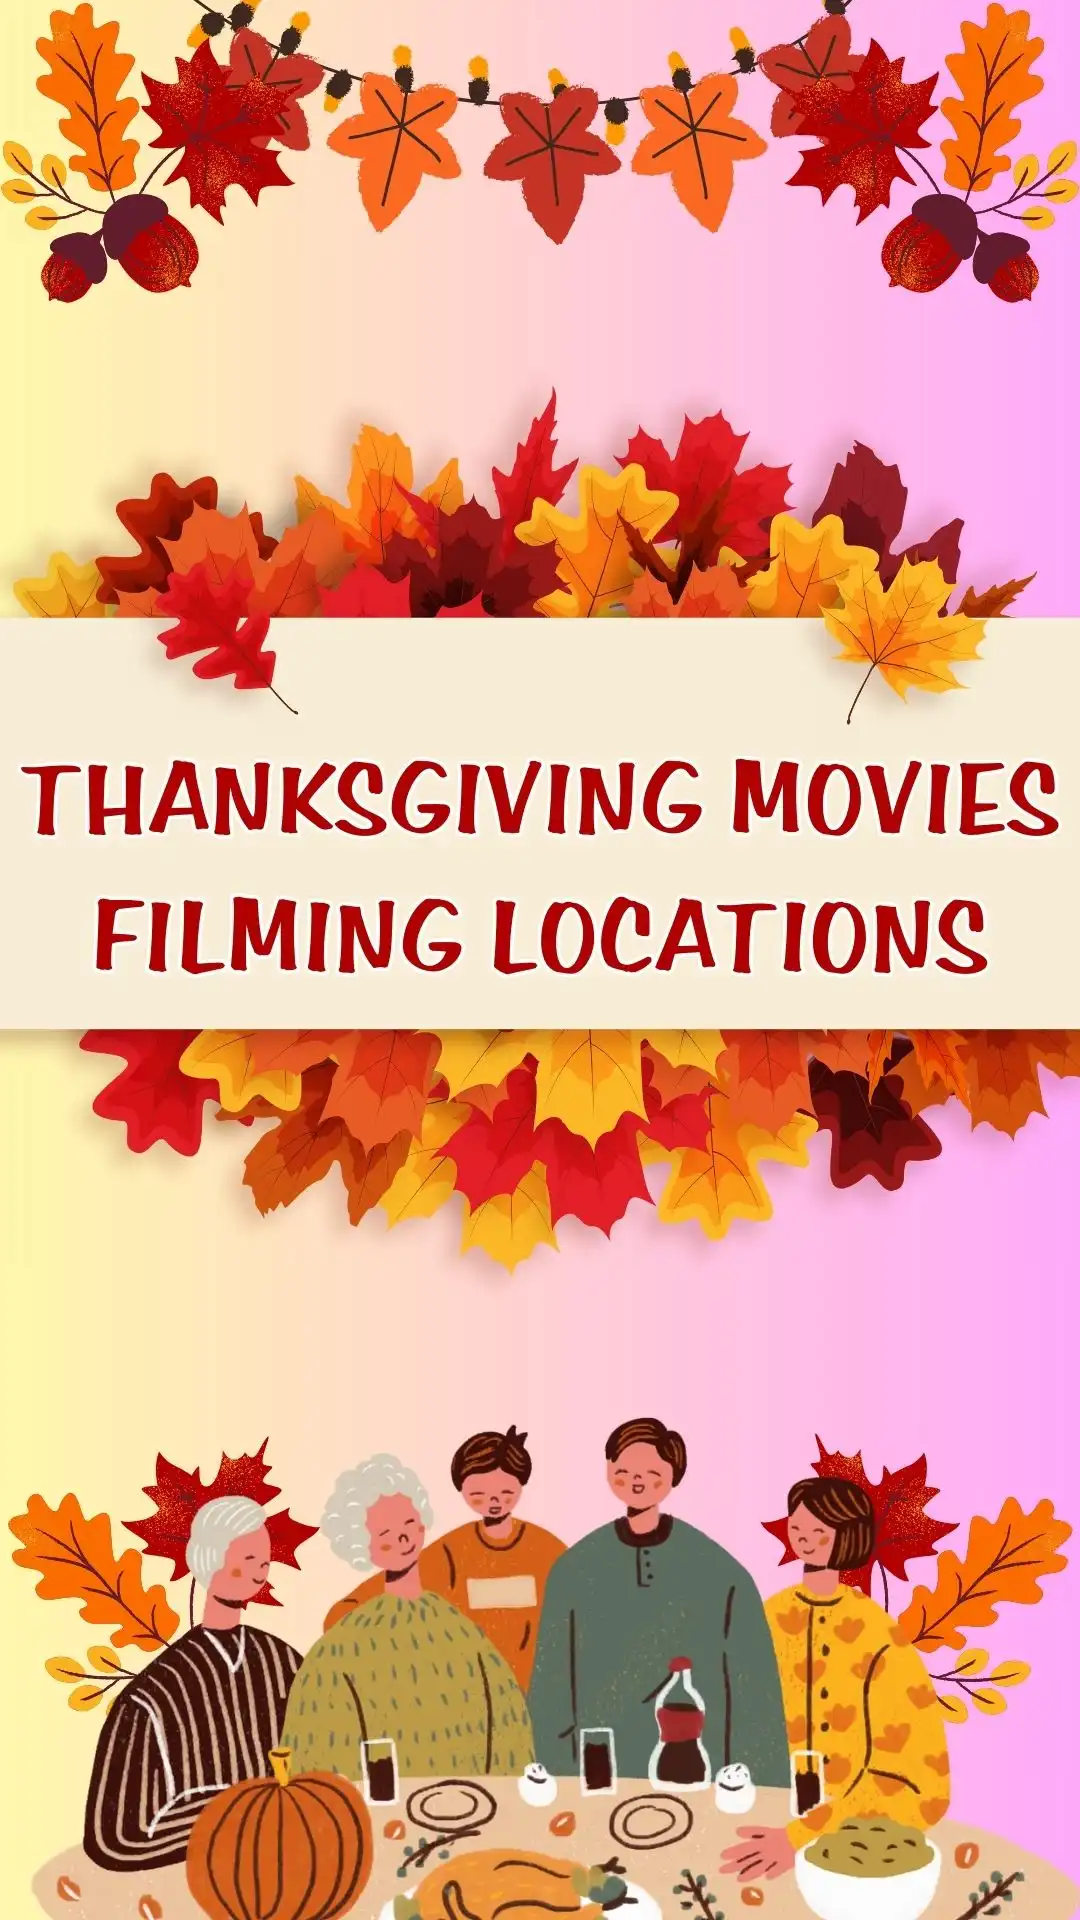 Thanksgiving Movies Filming Locations